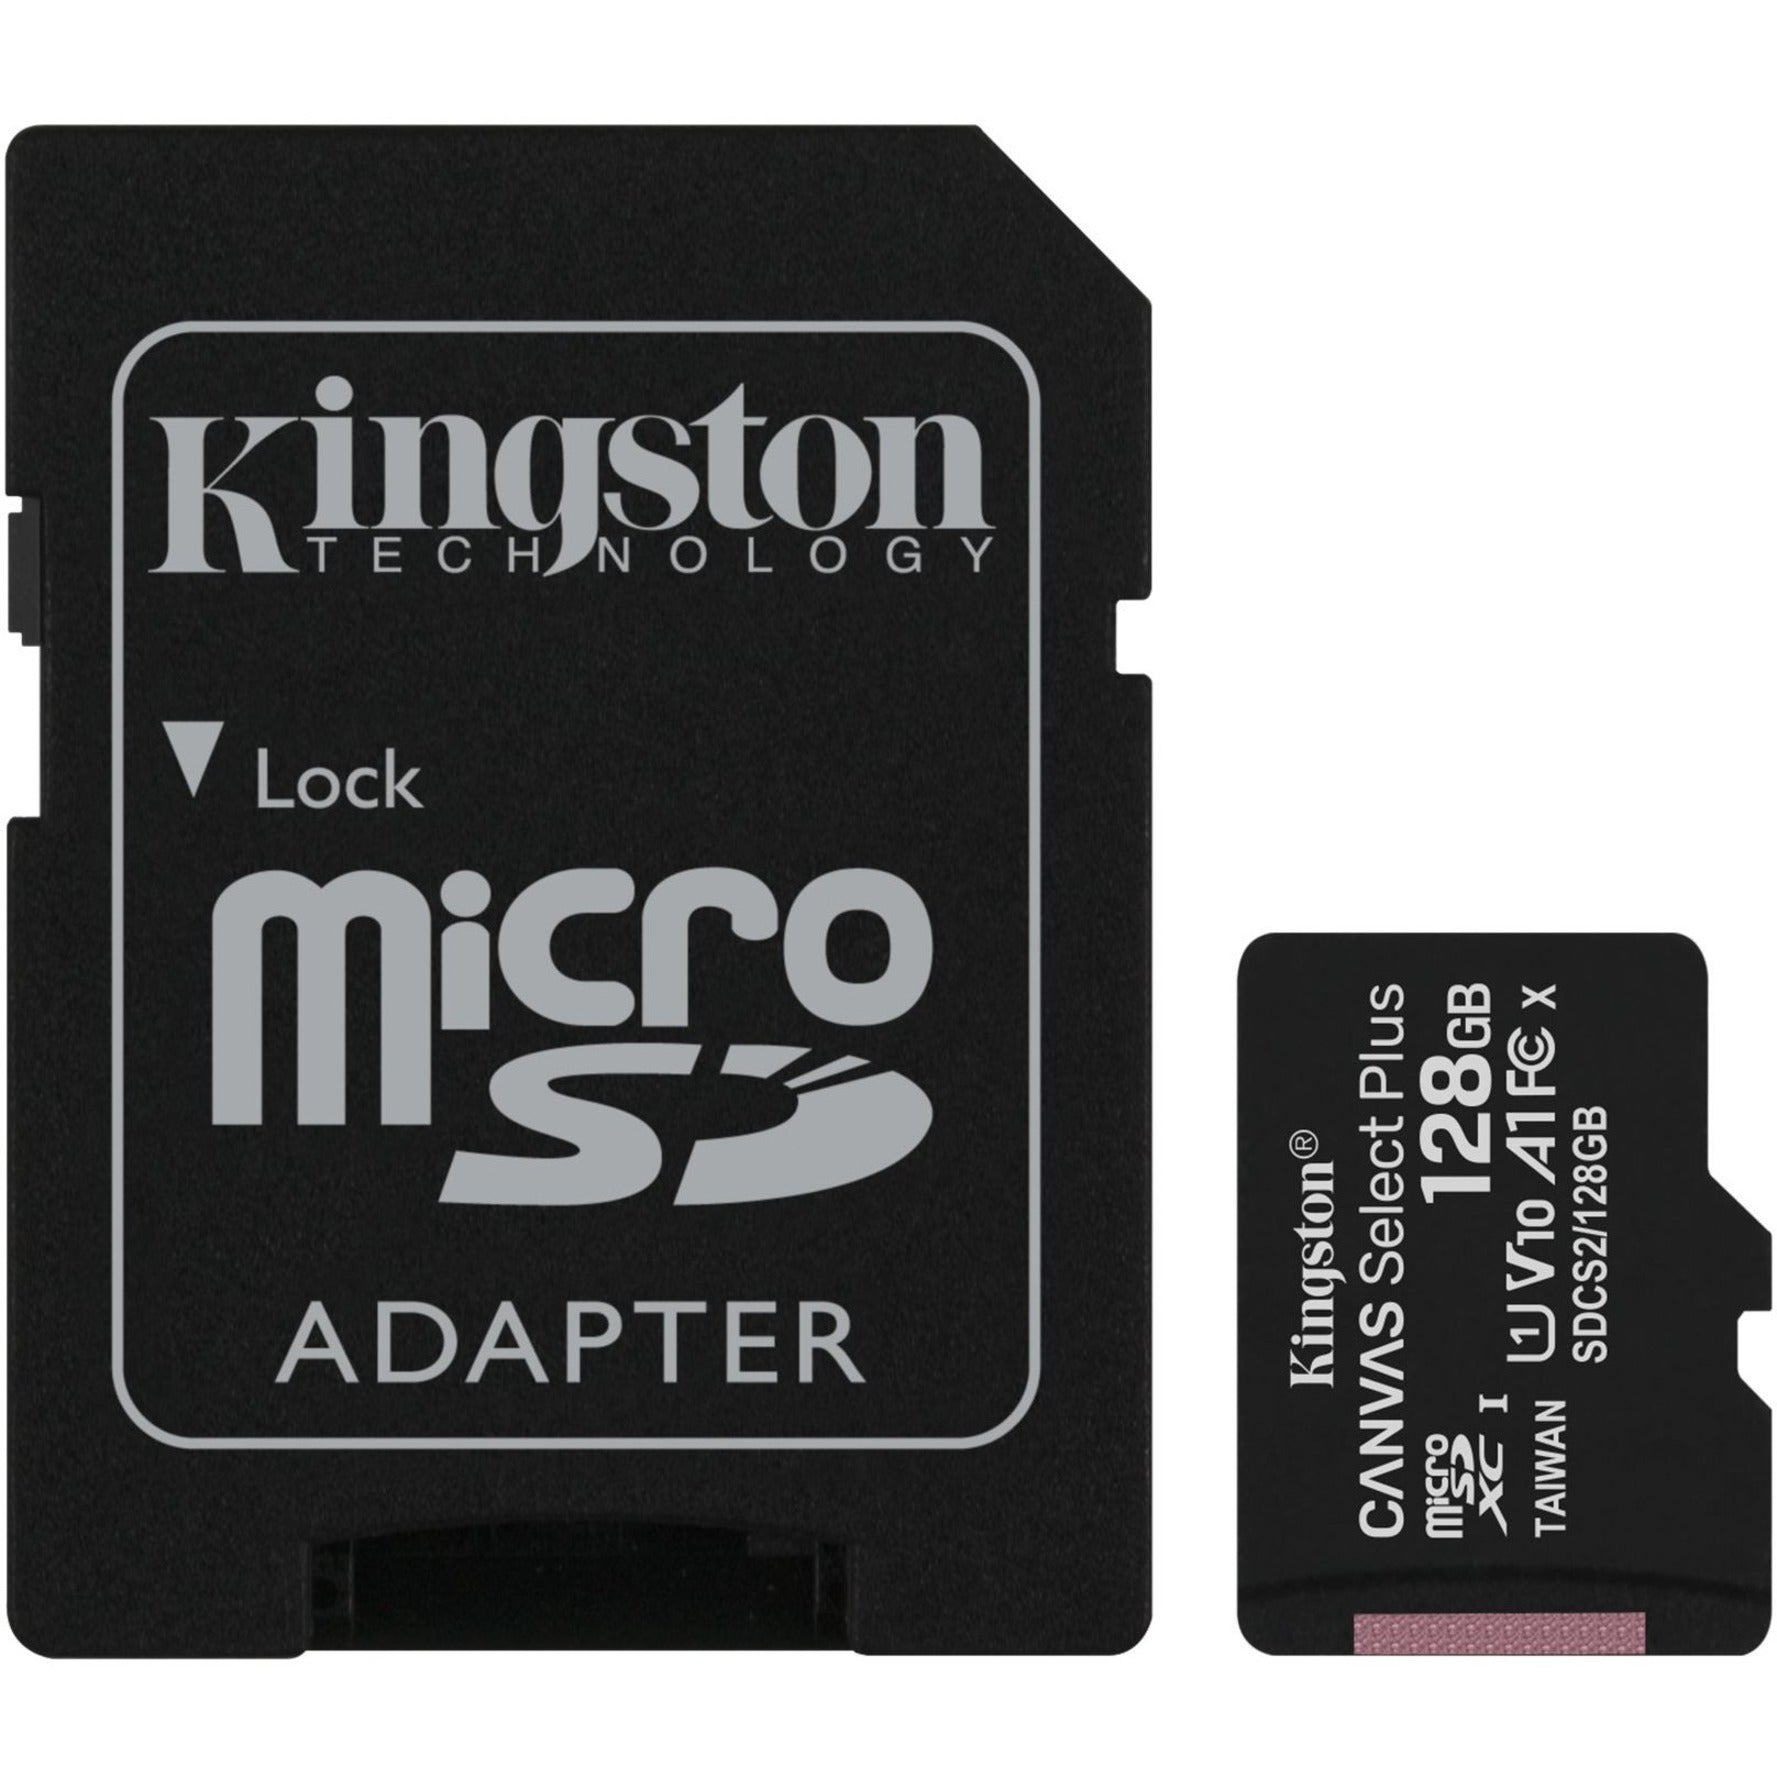 Kingston SDCS2/128GB Canvas Select Plus microSD Card With Android A1 Performance Class, 128GB Storage Capacity, 100 MB/s Read Speed, Class 10/UHS-I (U1)